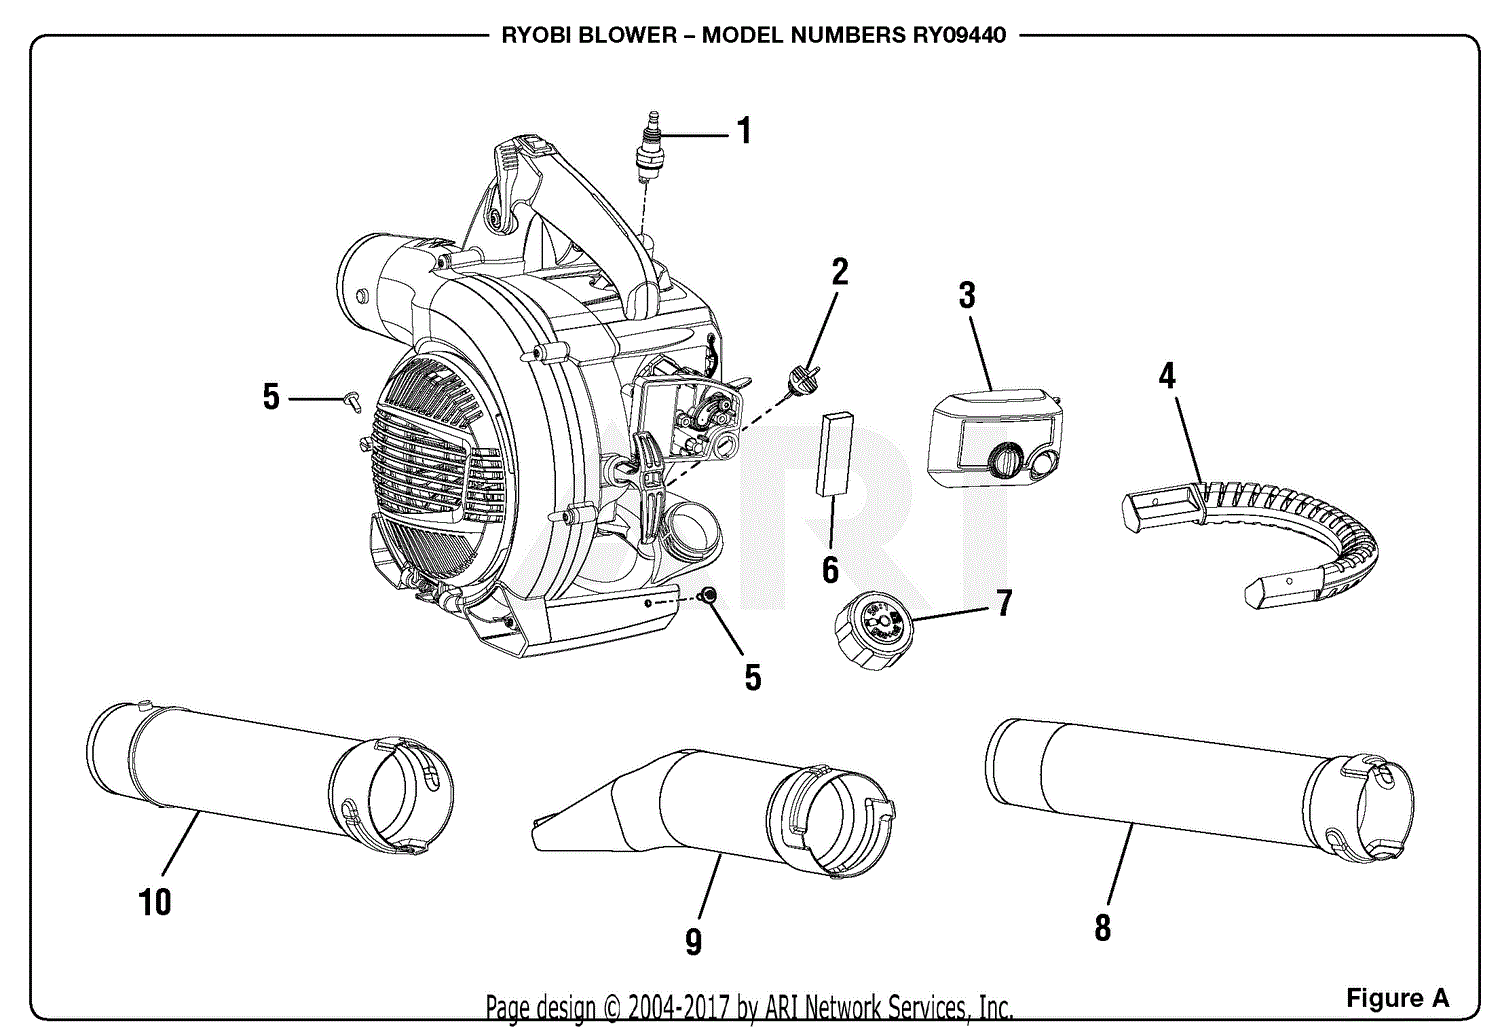 Homelite Ry09440 Blower Parts Diagram For Figure A